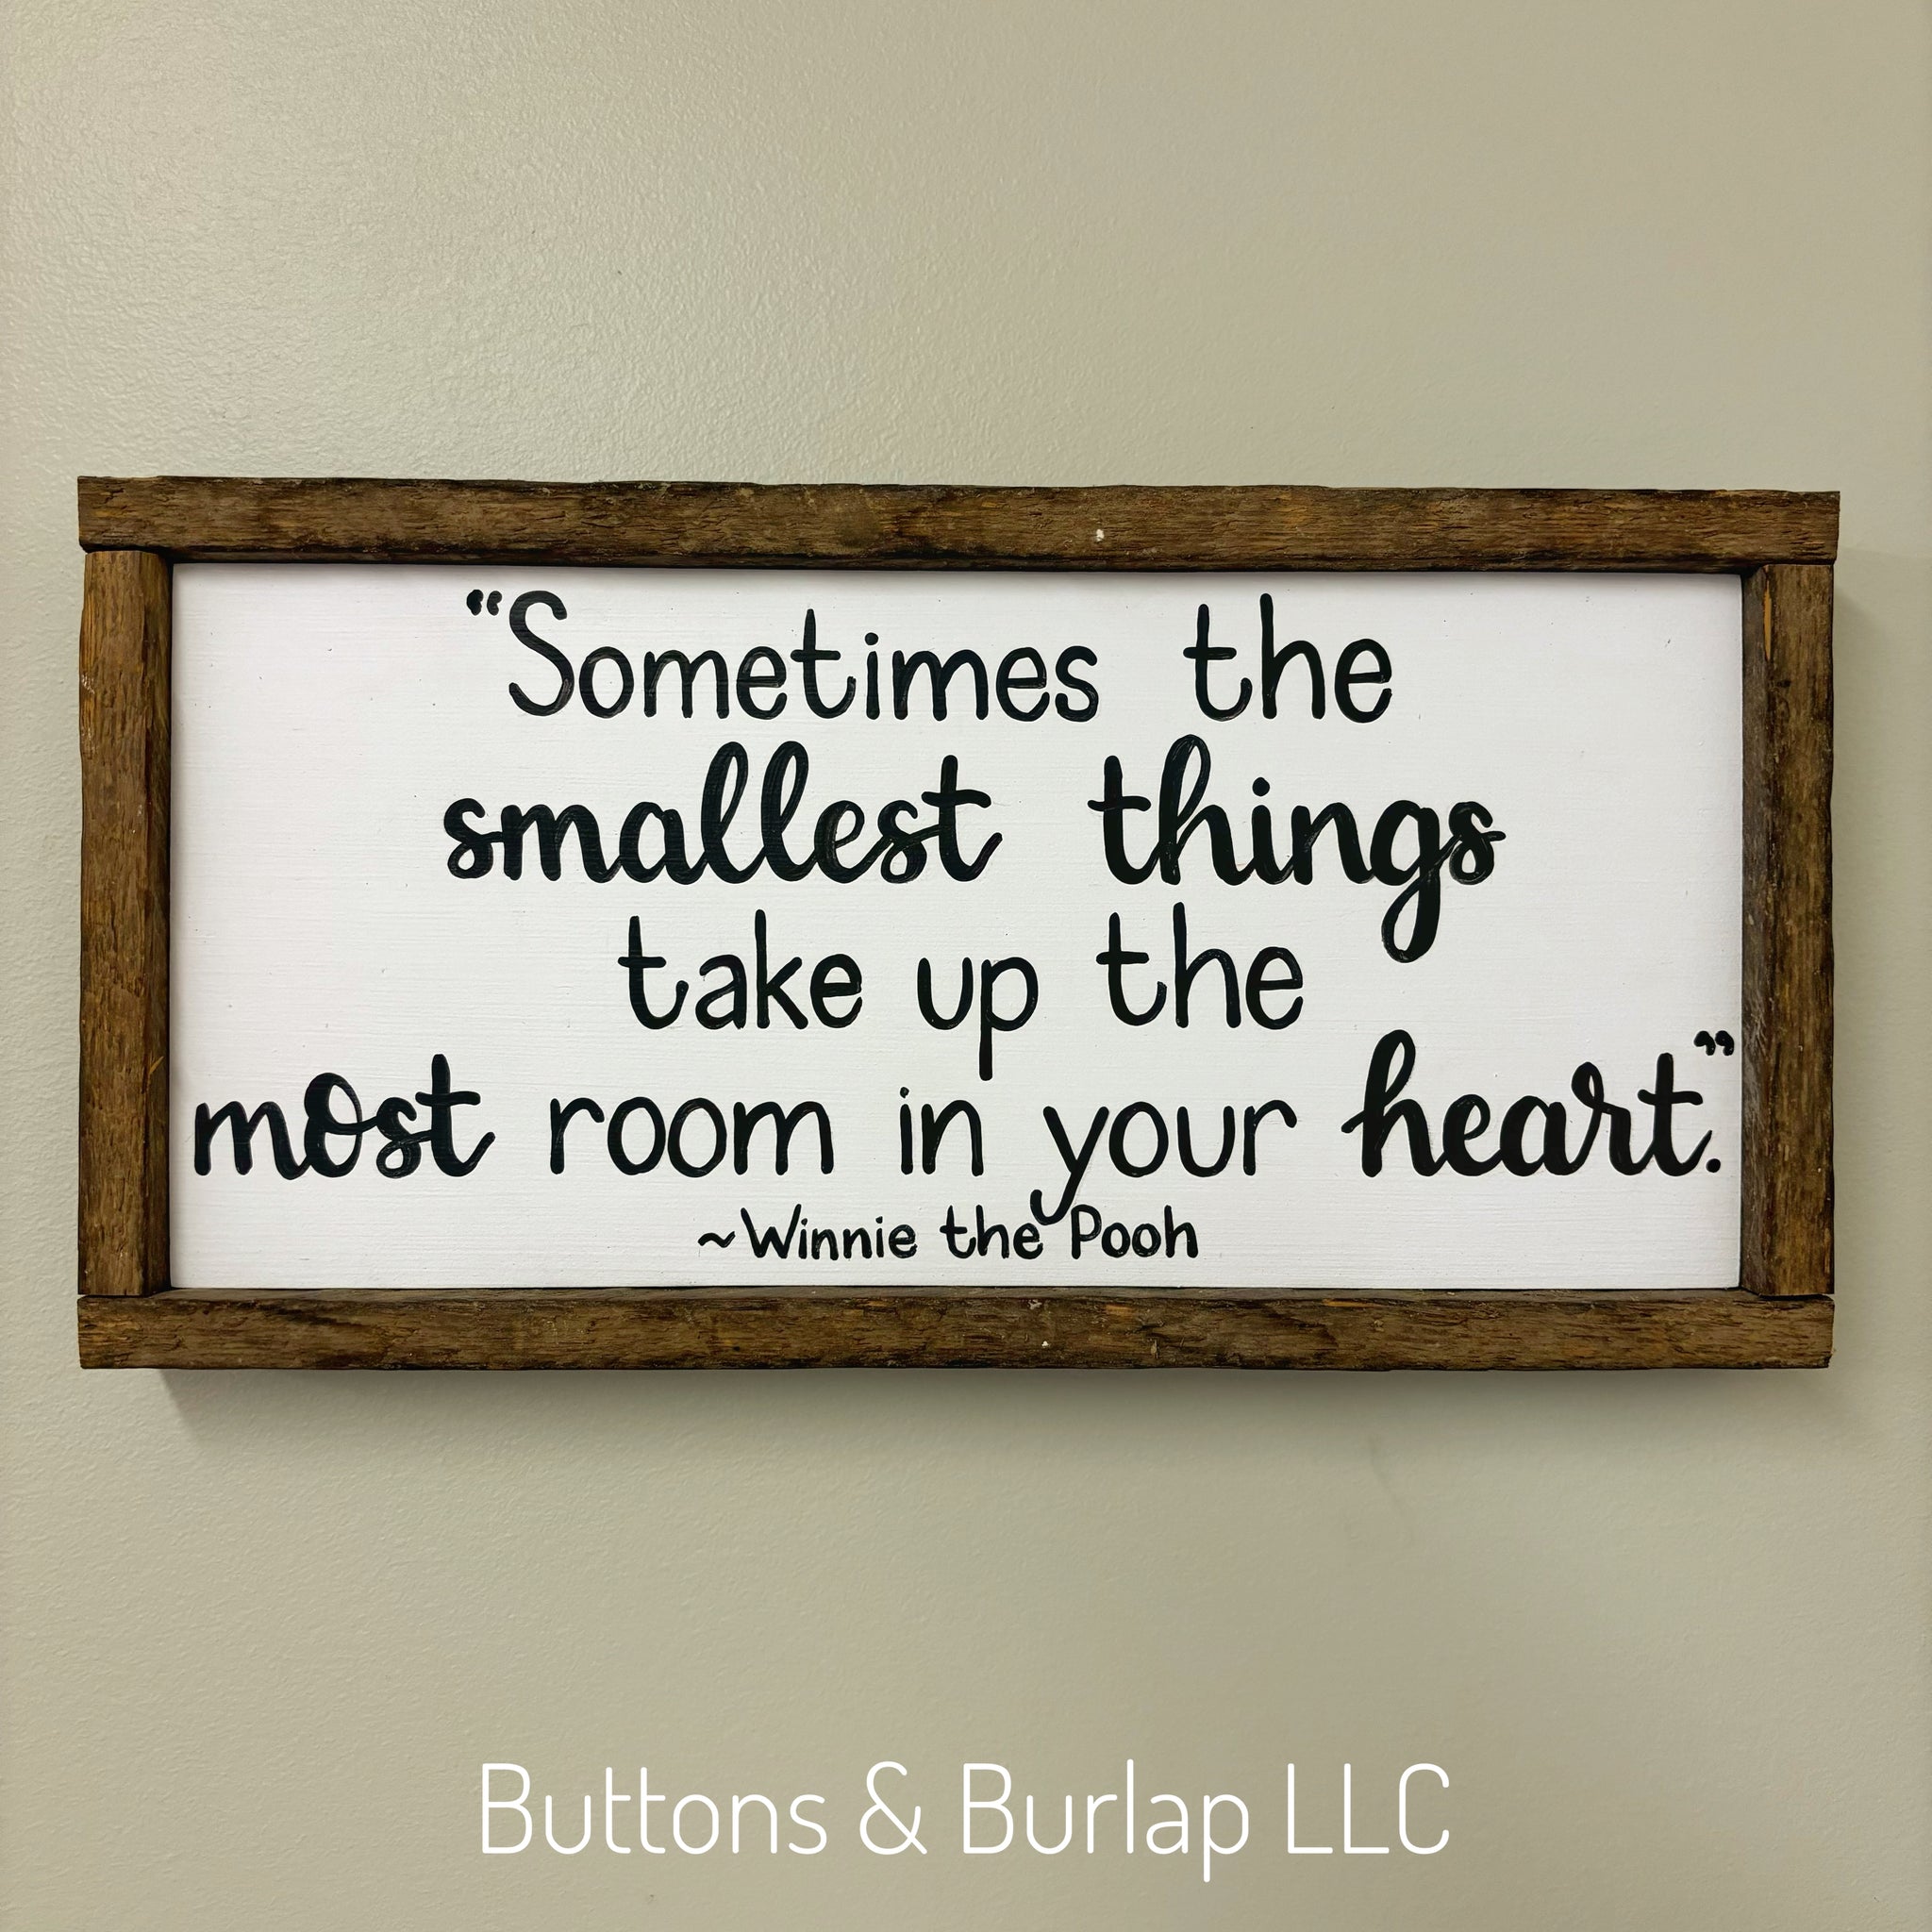 The smallest things ~Winnie the Pooh